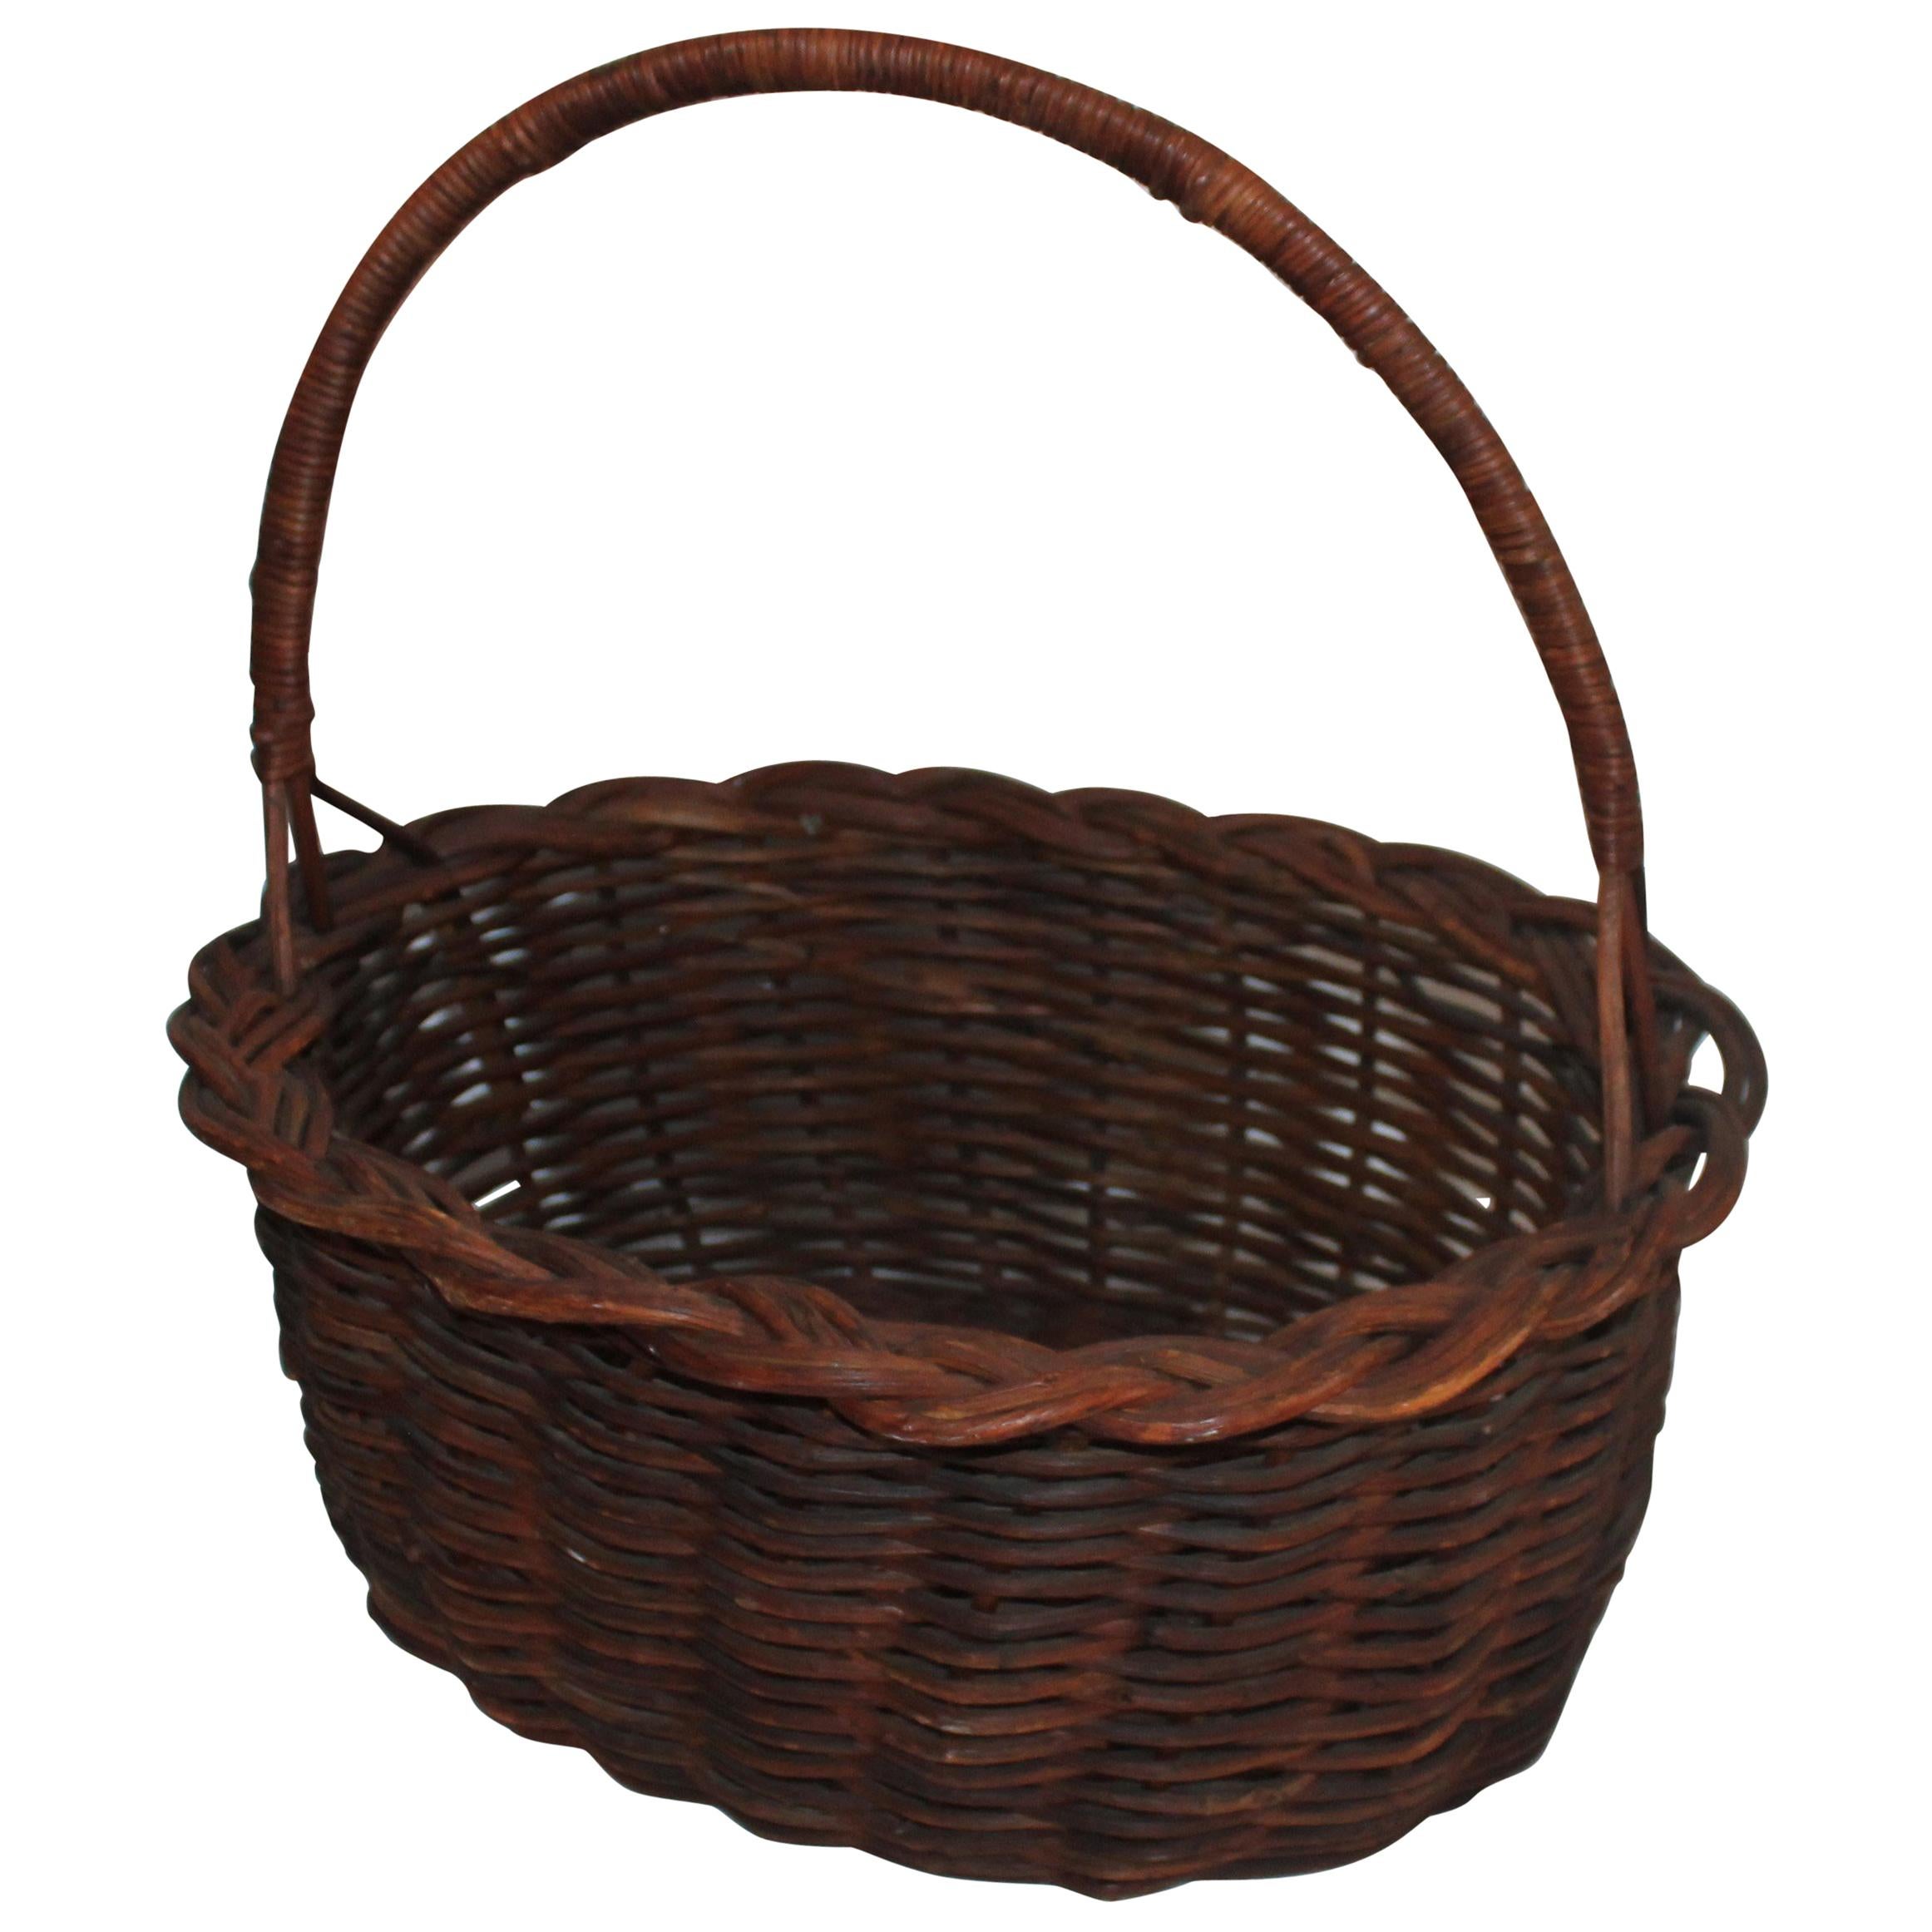 19th Century Basket with Handle from Pennsylvania